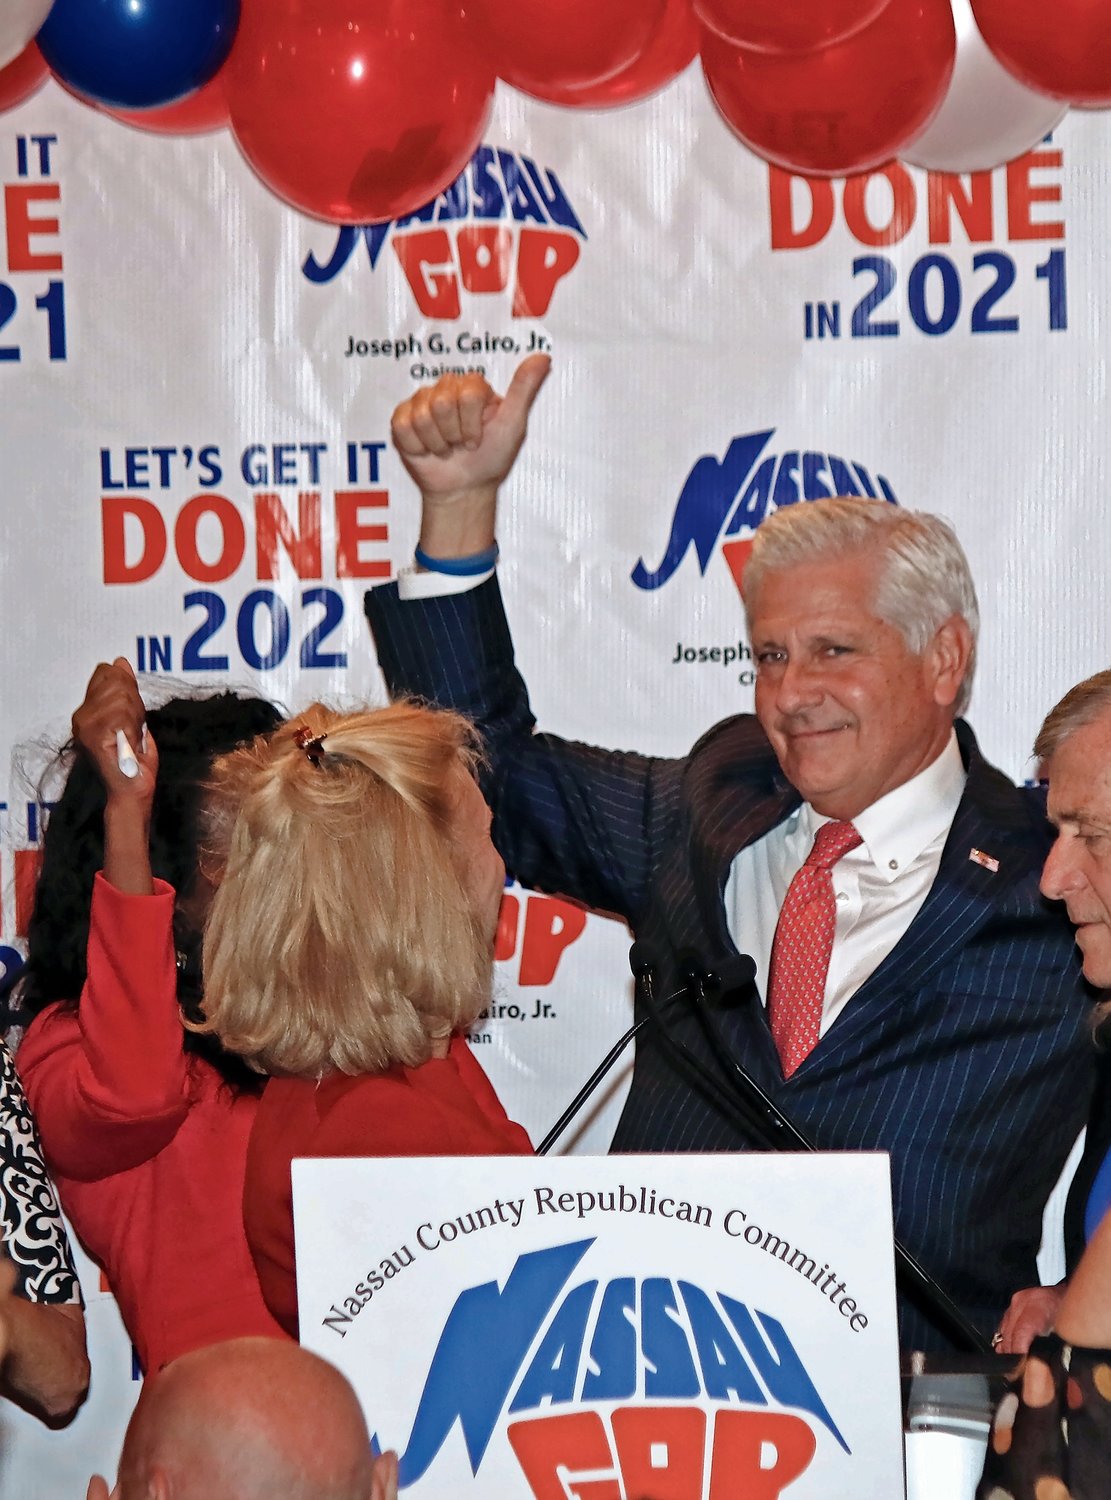 Bruce Blakeman, Republican candidate for Nassau county executive, declared victory Tuesday night, though the vote count was not official, with absentee ballots remained to be counted. Incumbent Laura Curran had not conceded as of press time Wednesday   morning.